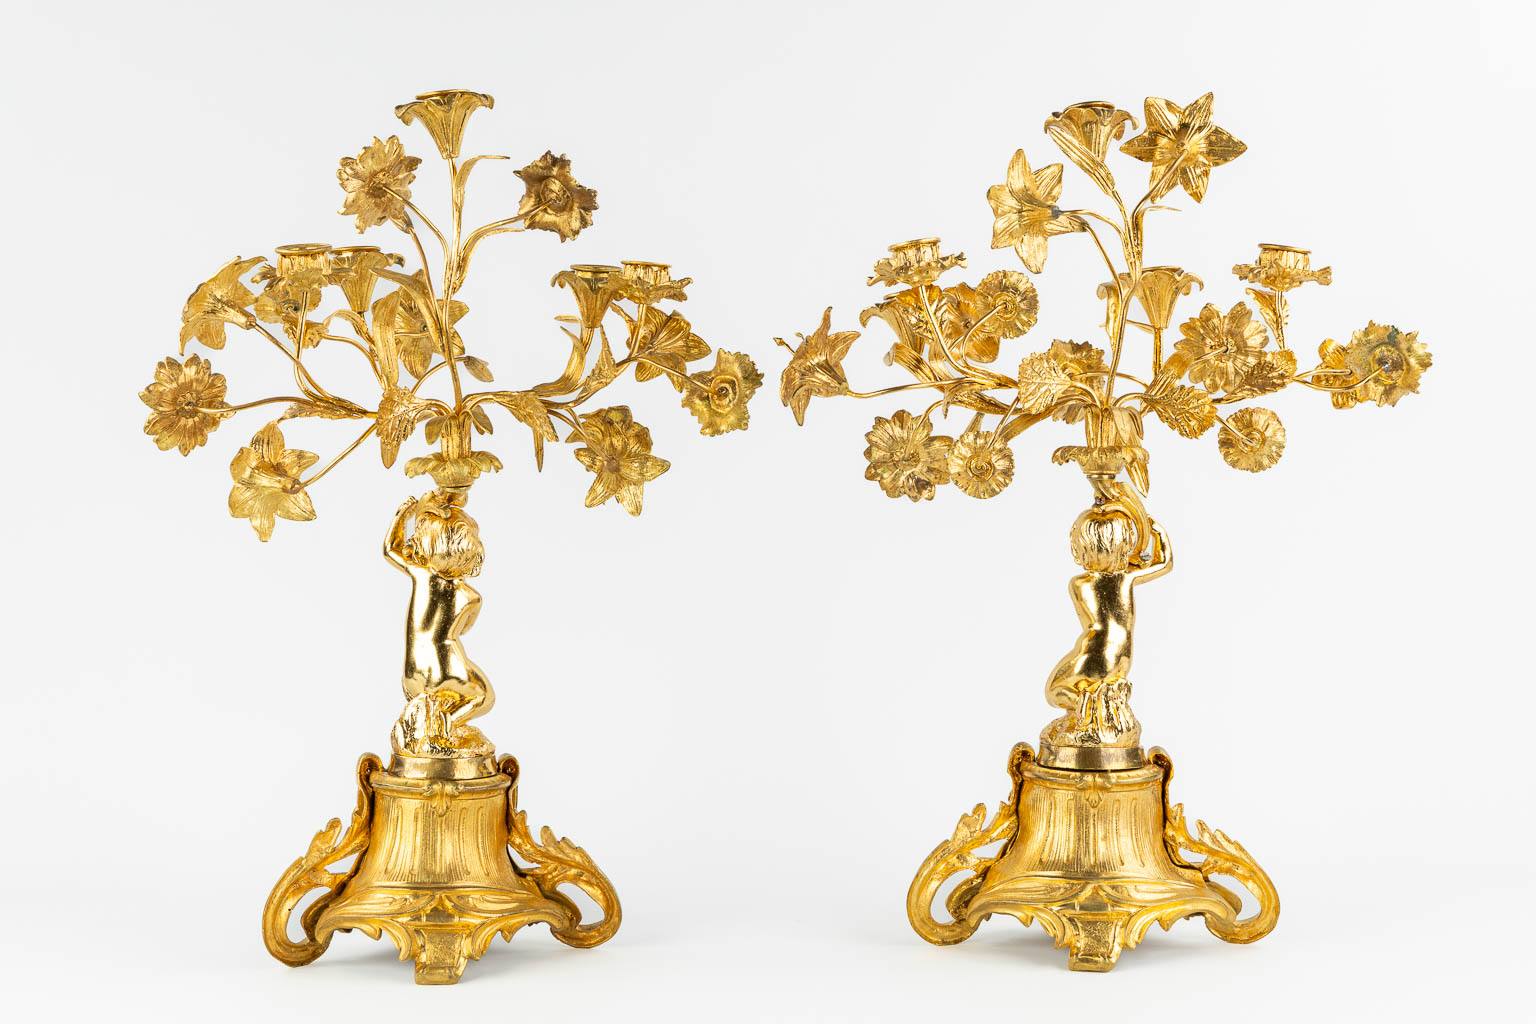 A pair of candelabra, gilt bronze decorated with putti and flowers. 19th C. (L:22 x W:36 x H:53 cm)